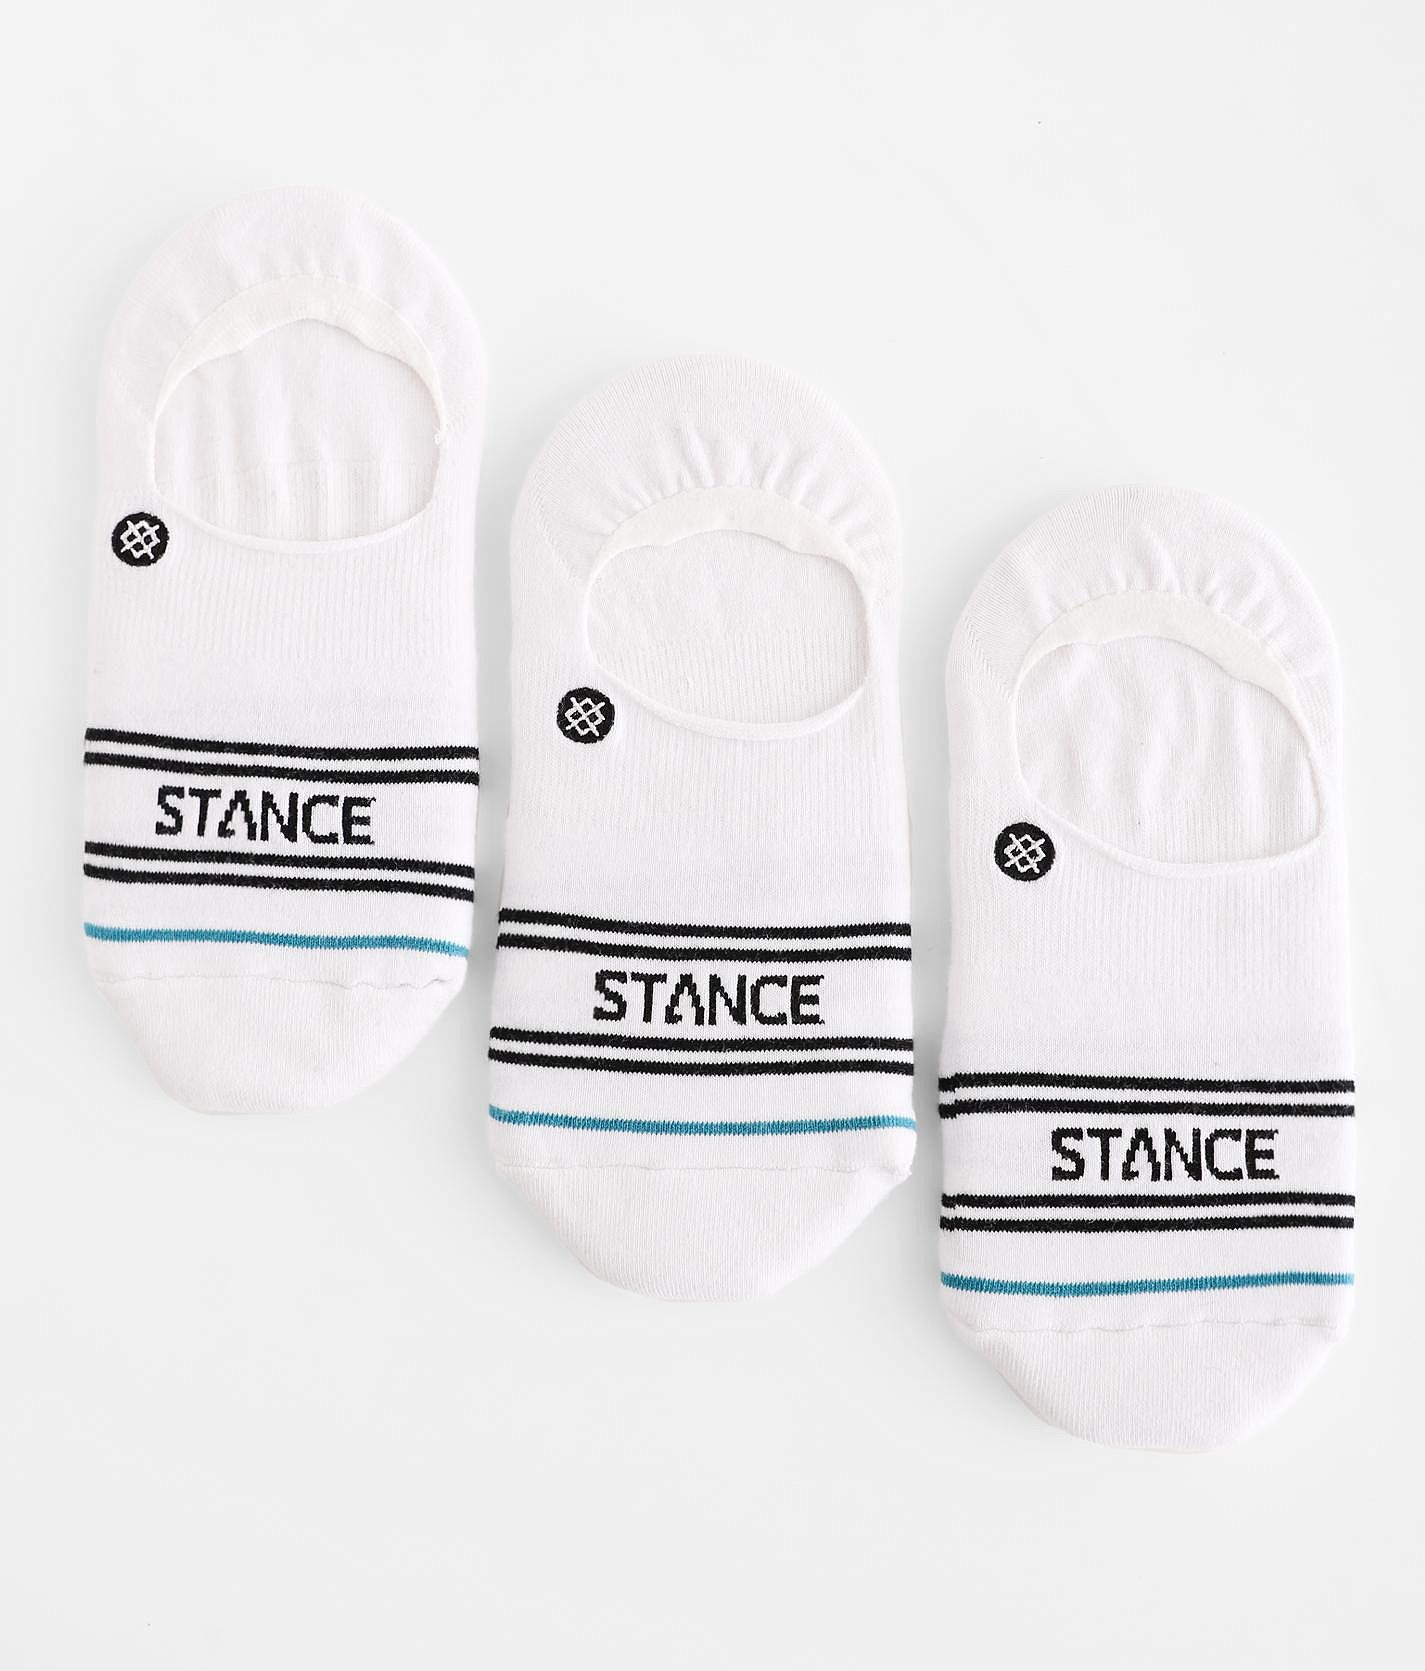 STANCE NEW Womens Invisible 3 Pack Socks White BNWT 